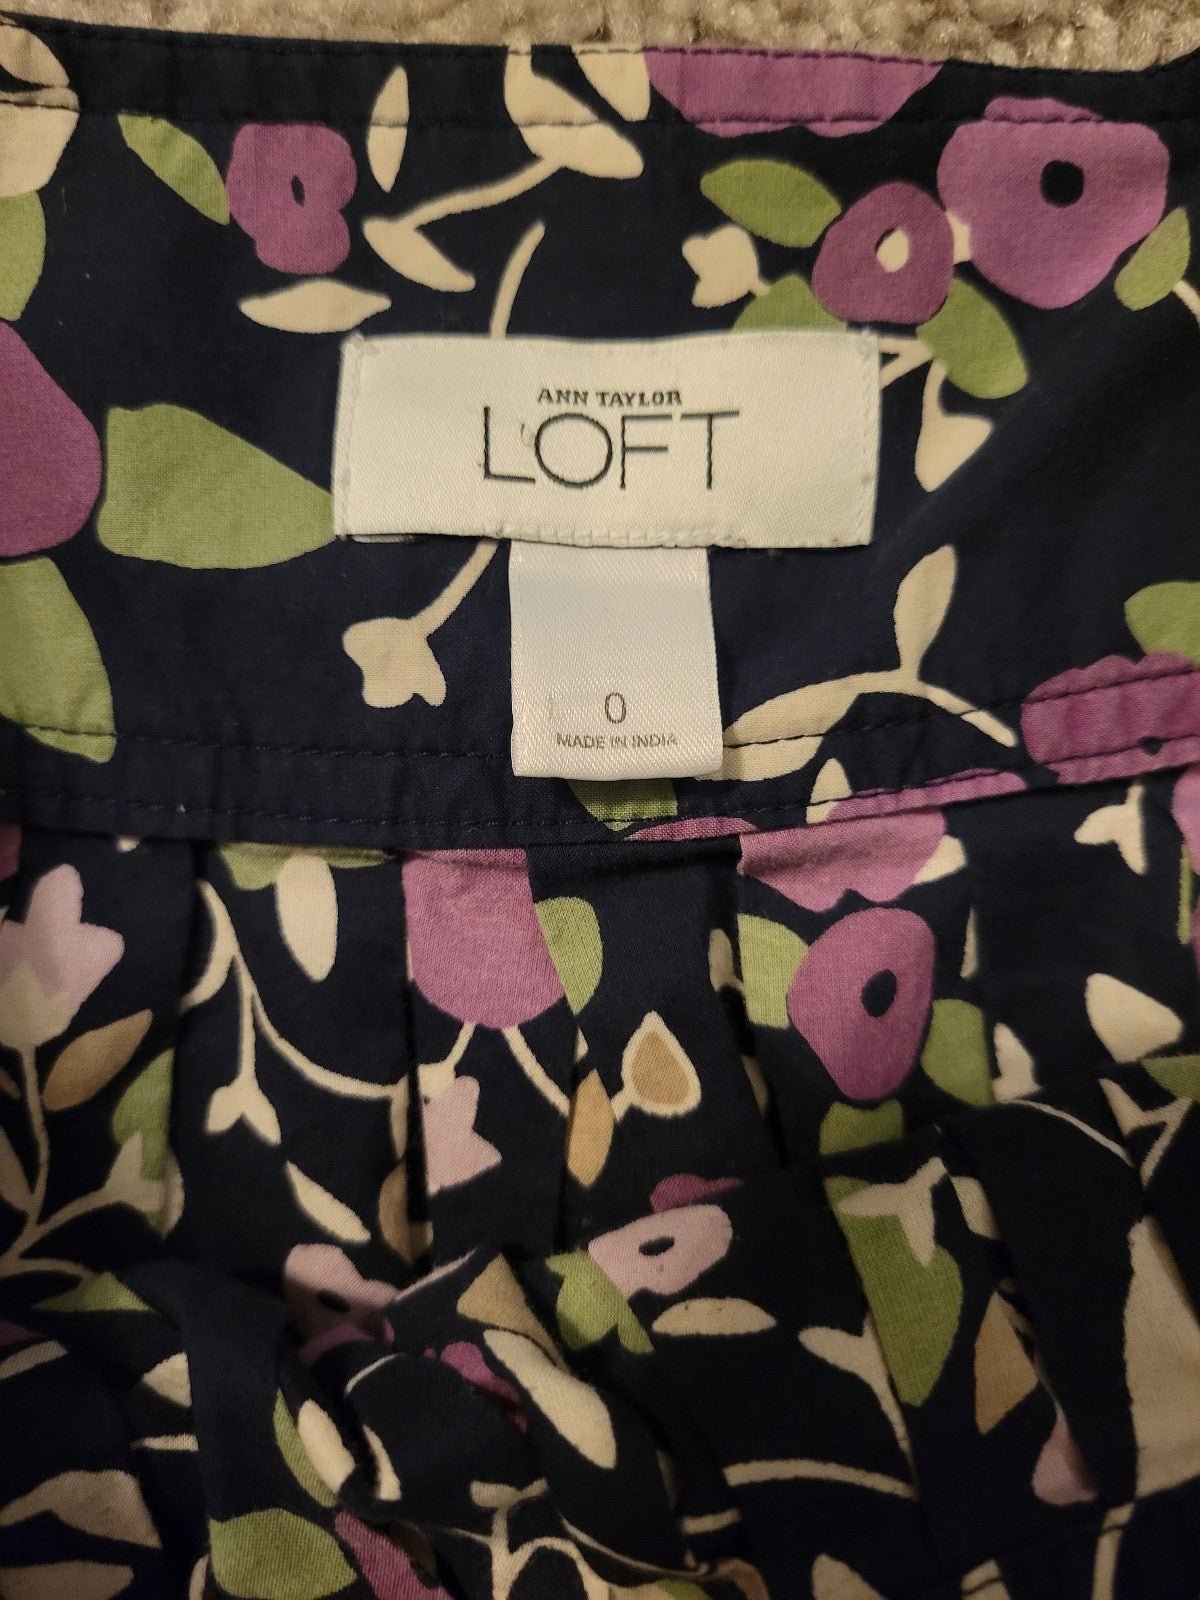 Cheap Ann Taylor Loft Womens Floral Print Pleated Tennis Skirt with Pockets Size 0 Med37r3tB outlet online shop